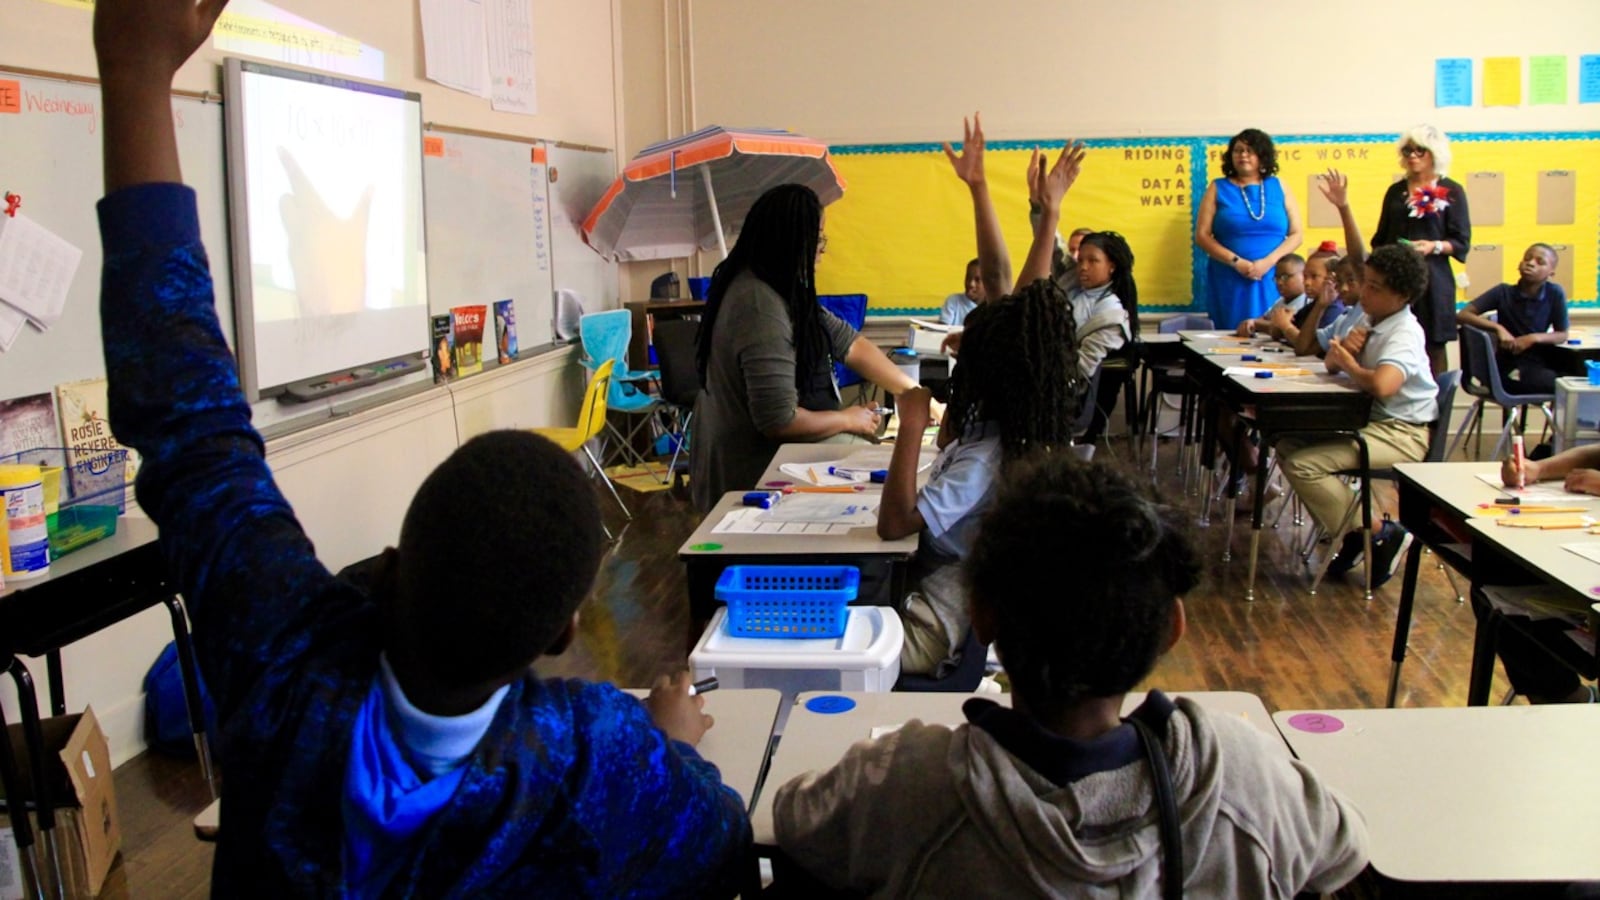 Students and adults sit at desks in a classroom.